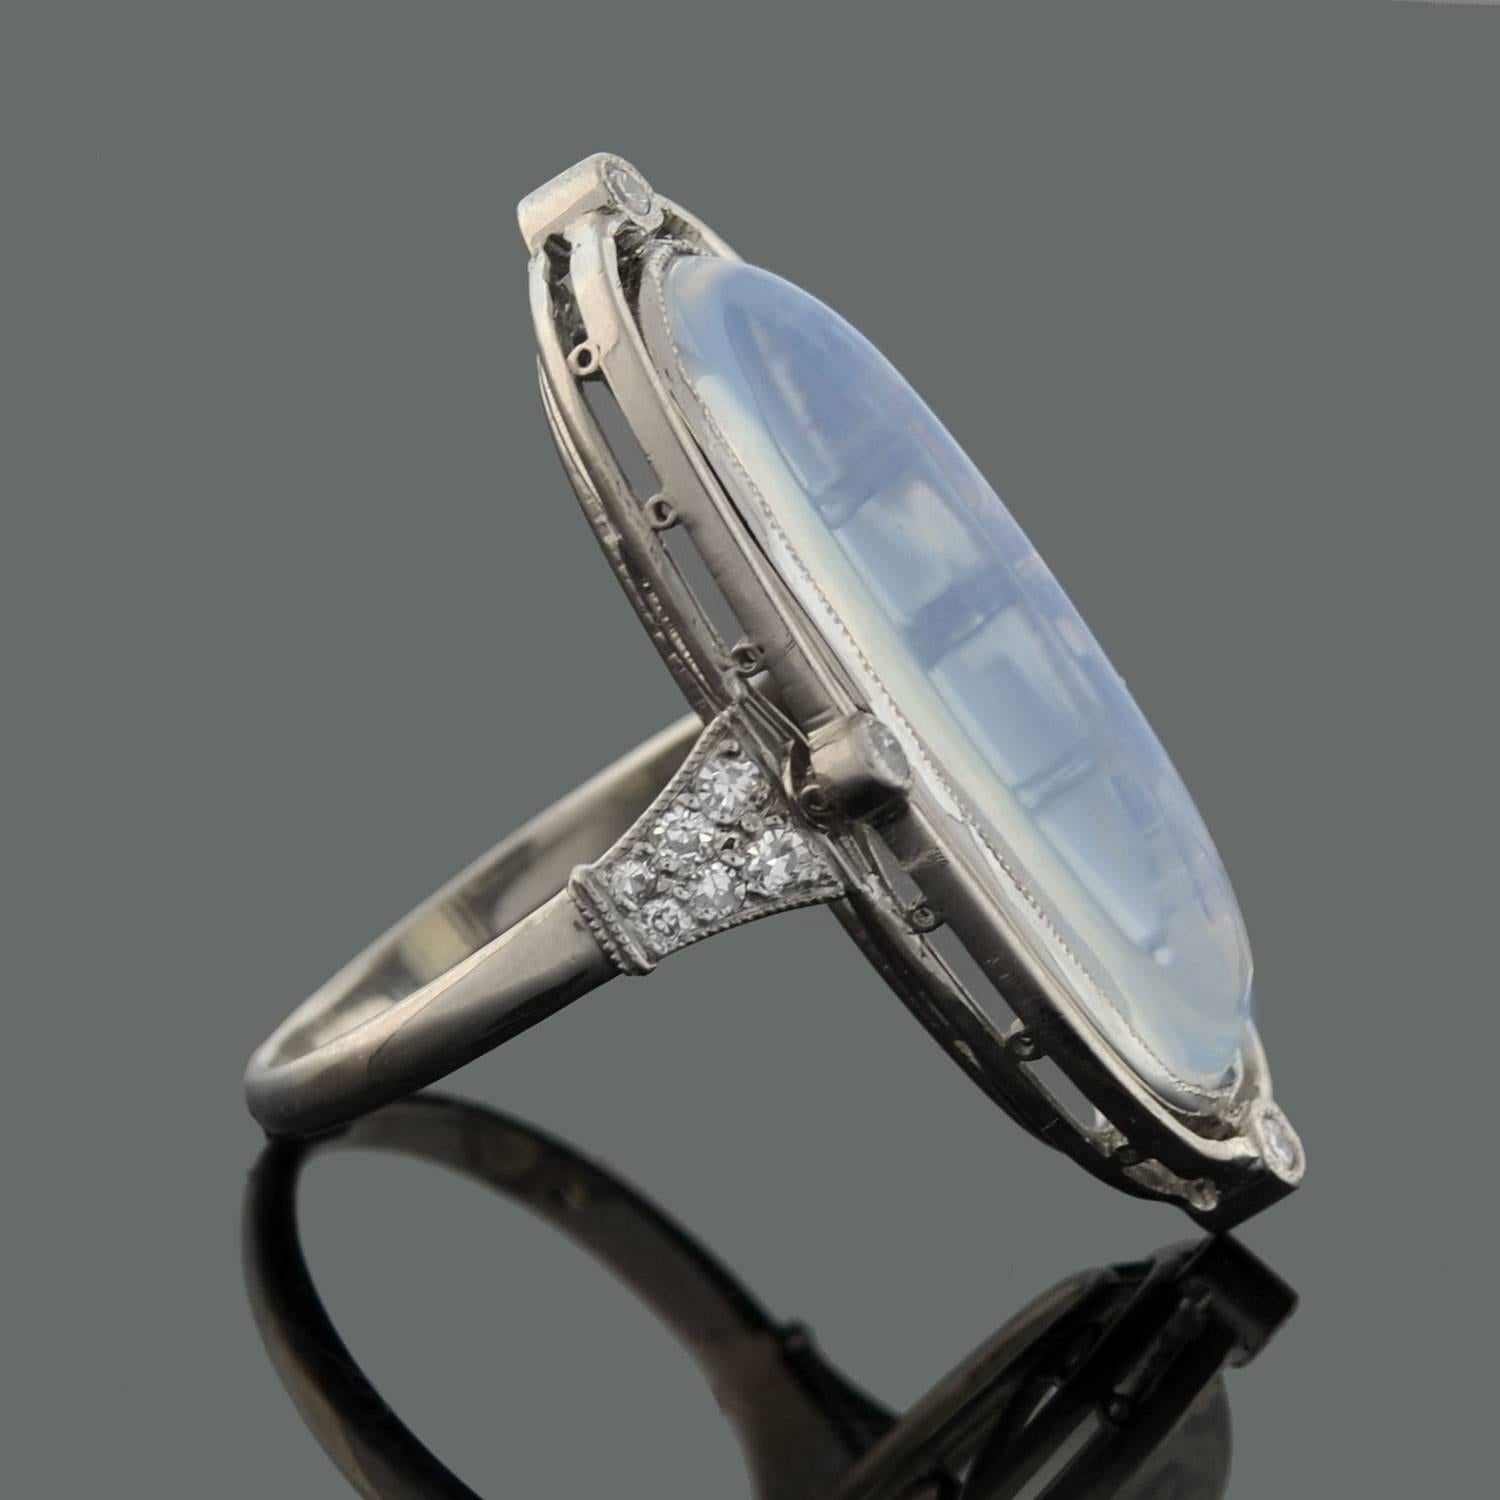 

This outstanding Tiffany & Co. moonstone ring from the Edwardian (ca1910) era is absolutely exquisite! Made of platinum, the ring has an elongated oval shape which features a large cabochon moonstone in the center. The moonstone, which weighs